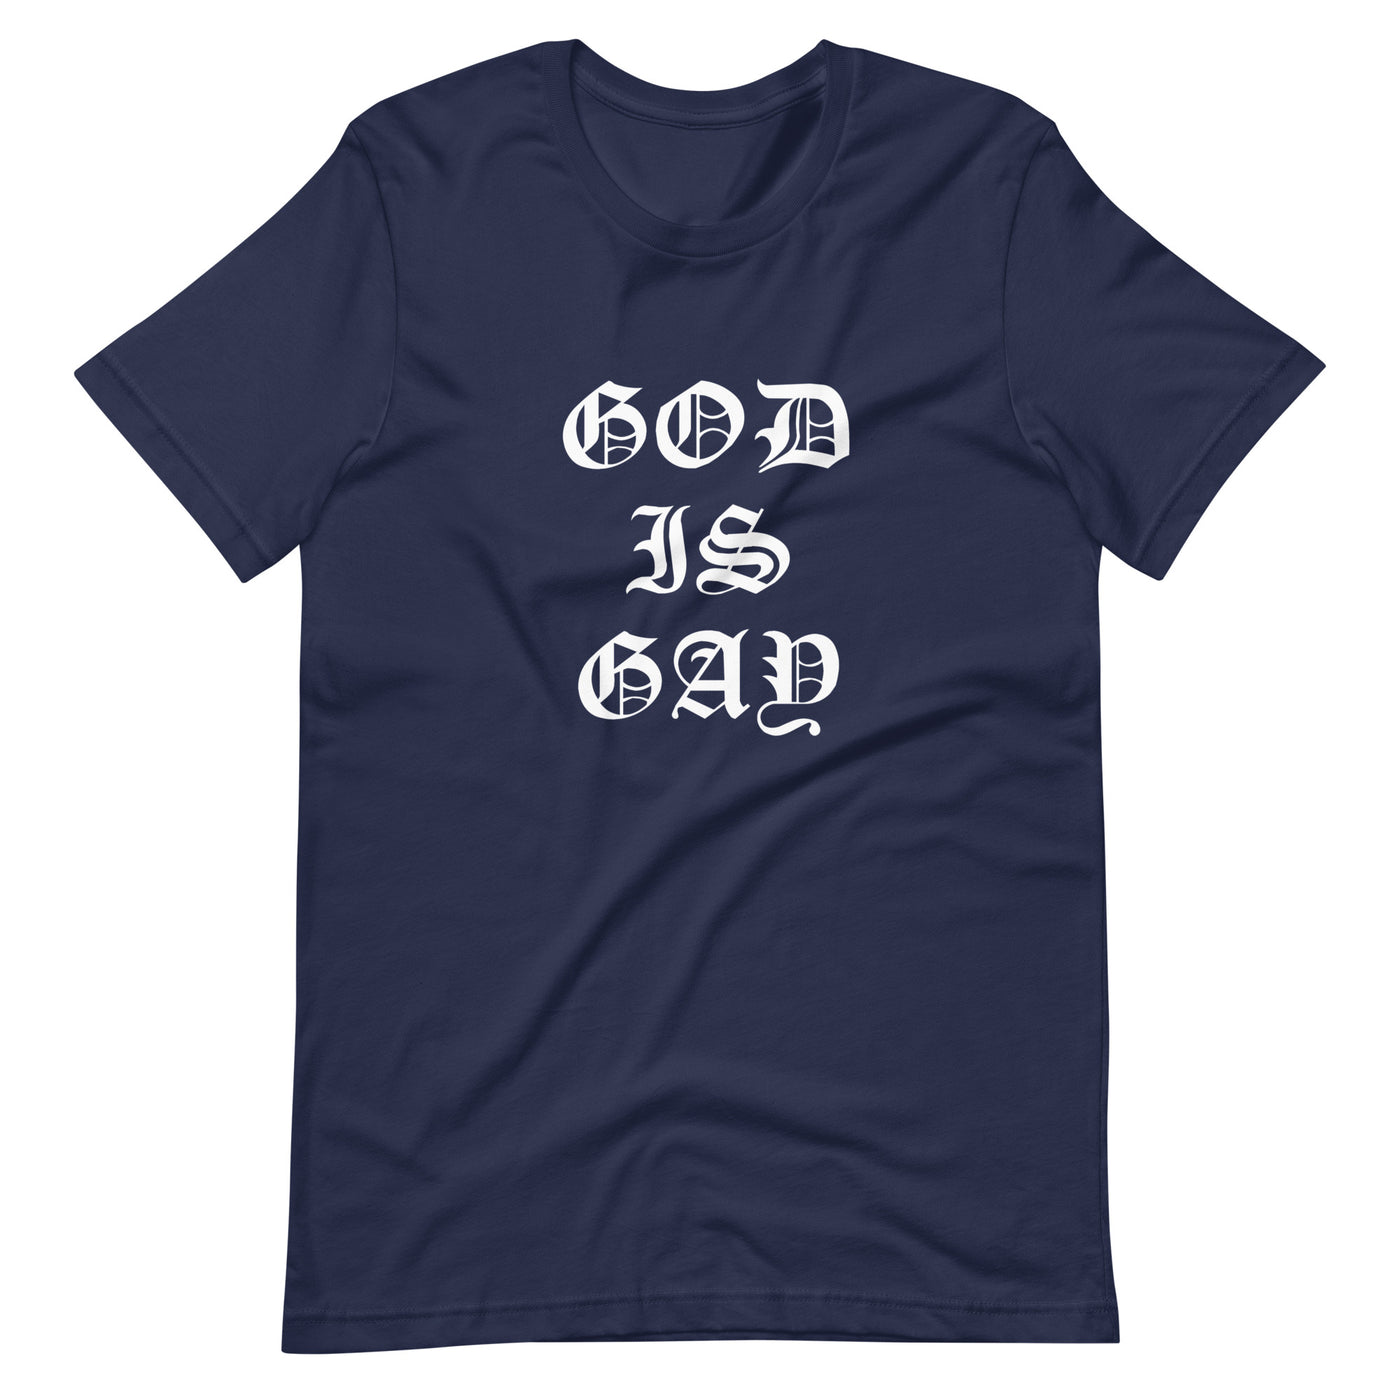 Pride Clothes - Ancient & Powerful Our God Is Gay Pride Merch T-Shirt - Navy